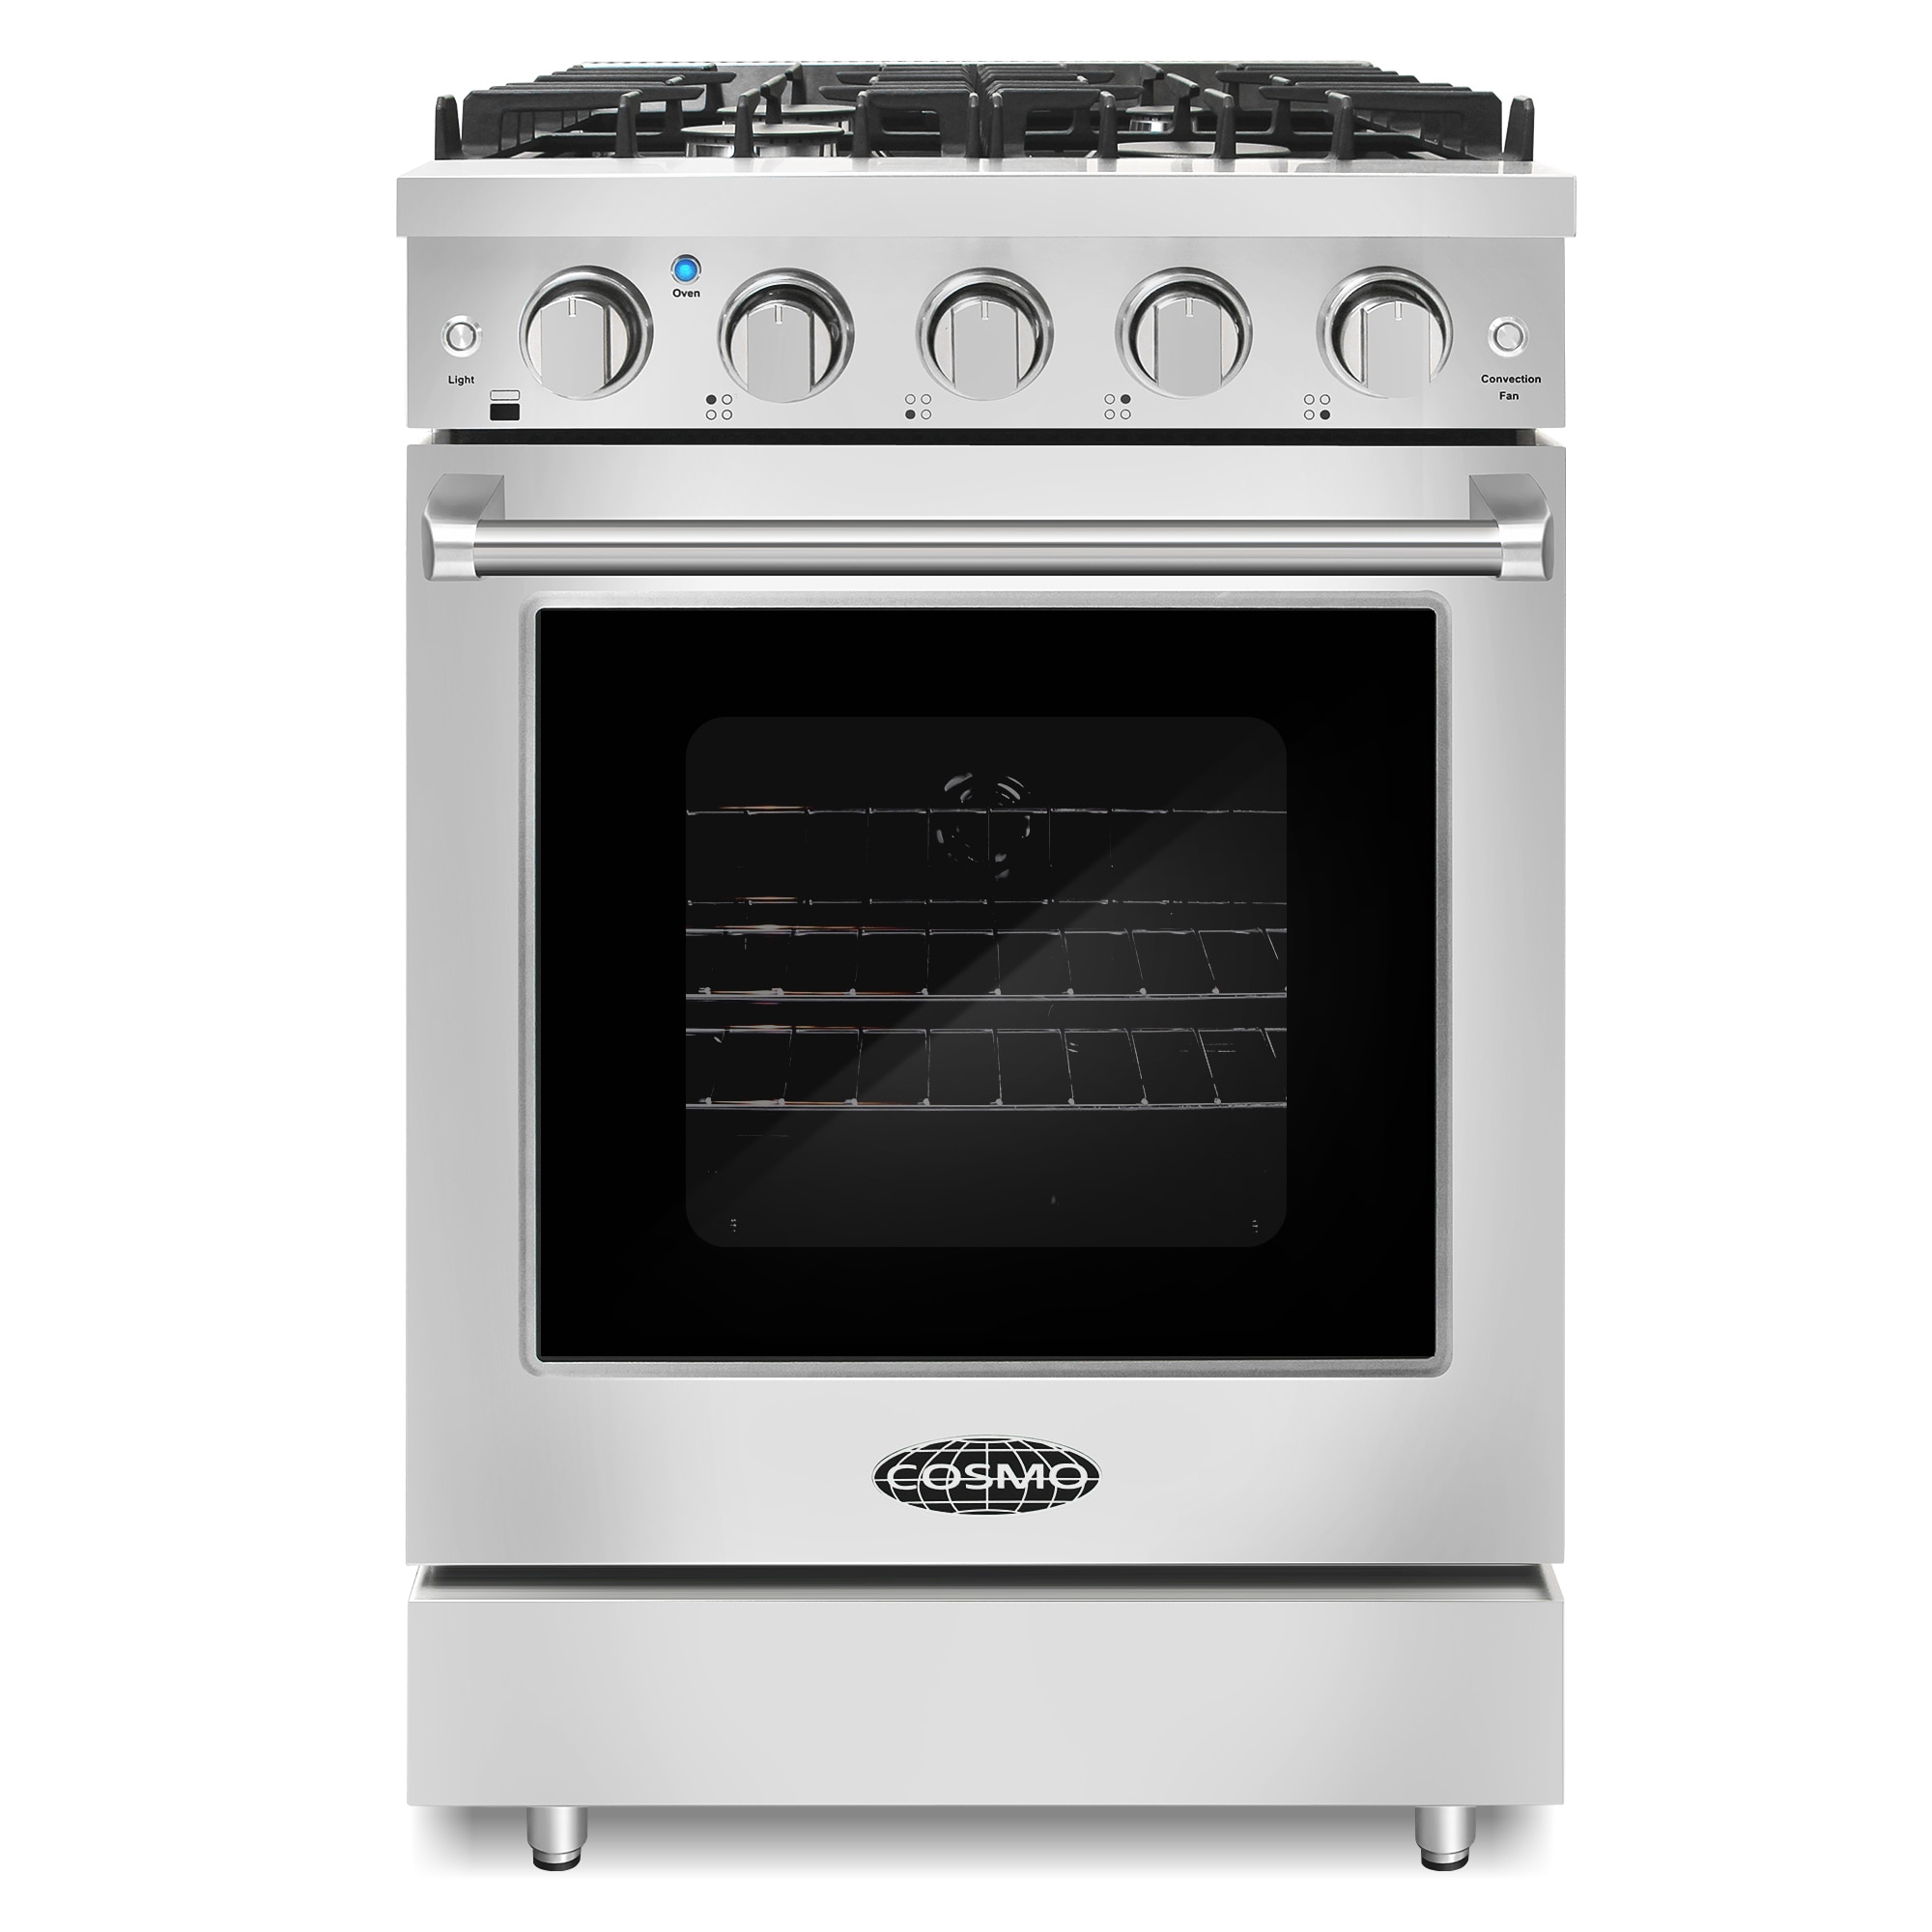 Cosmo 24-Inch 2.2 Cu. Ft. Countertop Microwave Oven in Stainless Steel